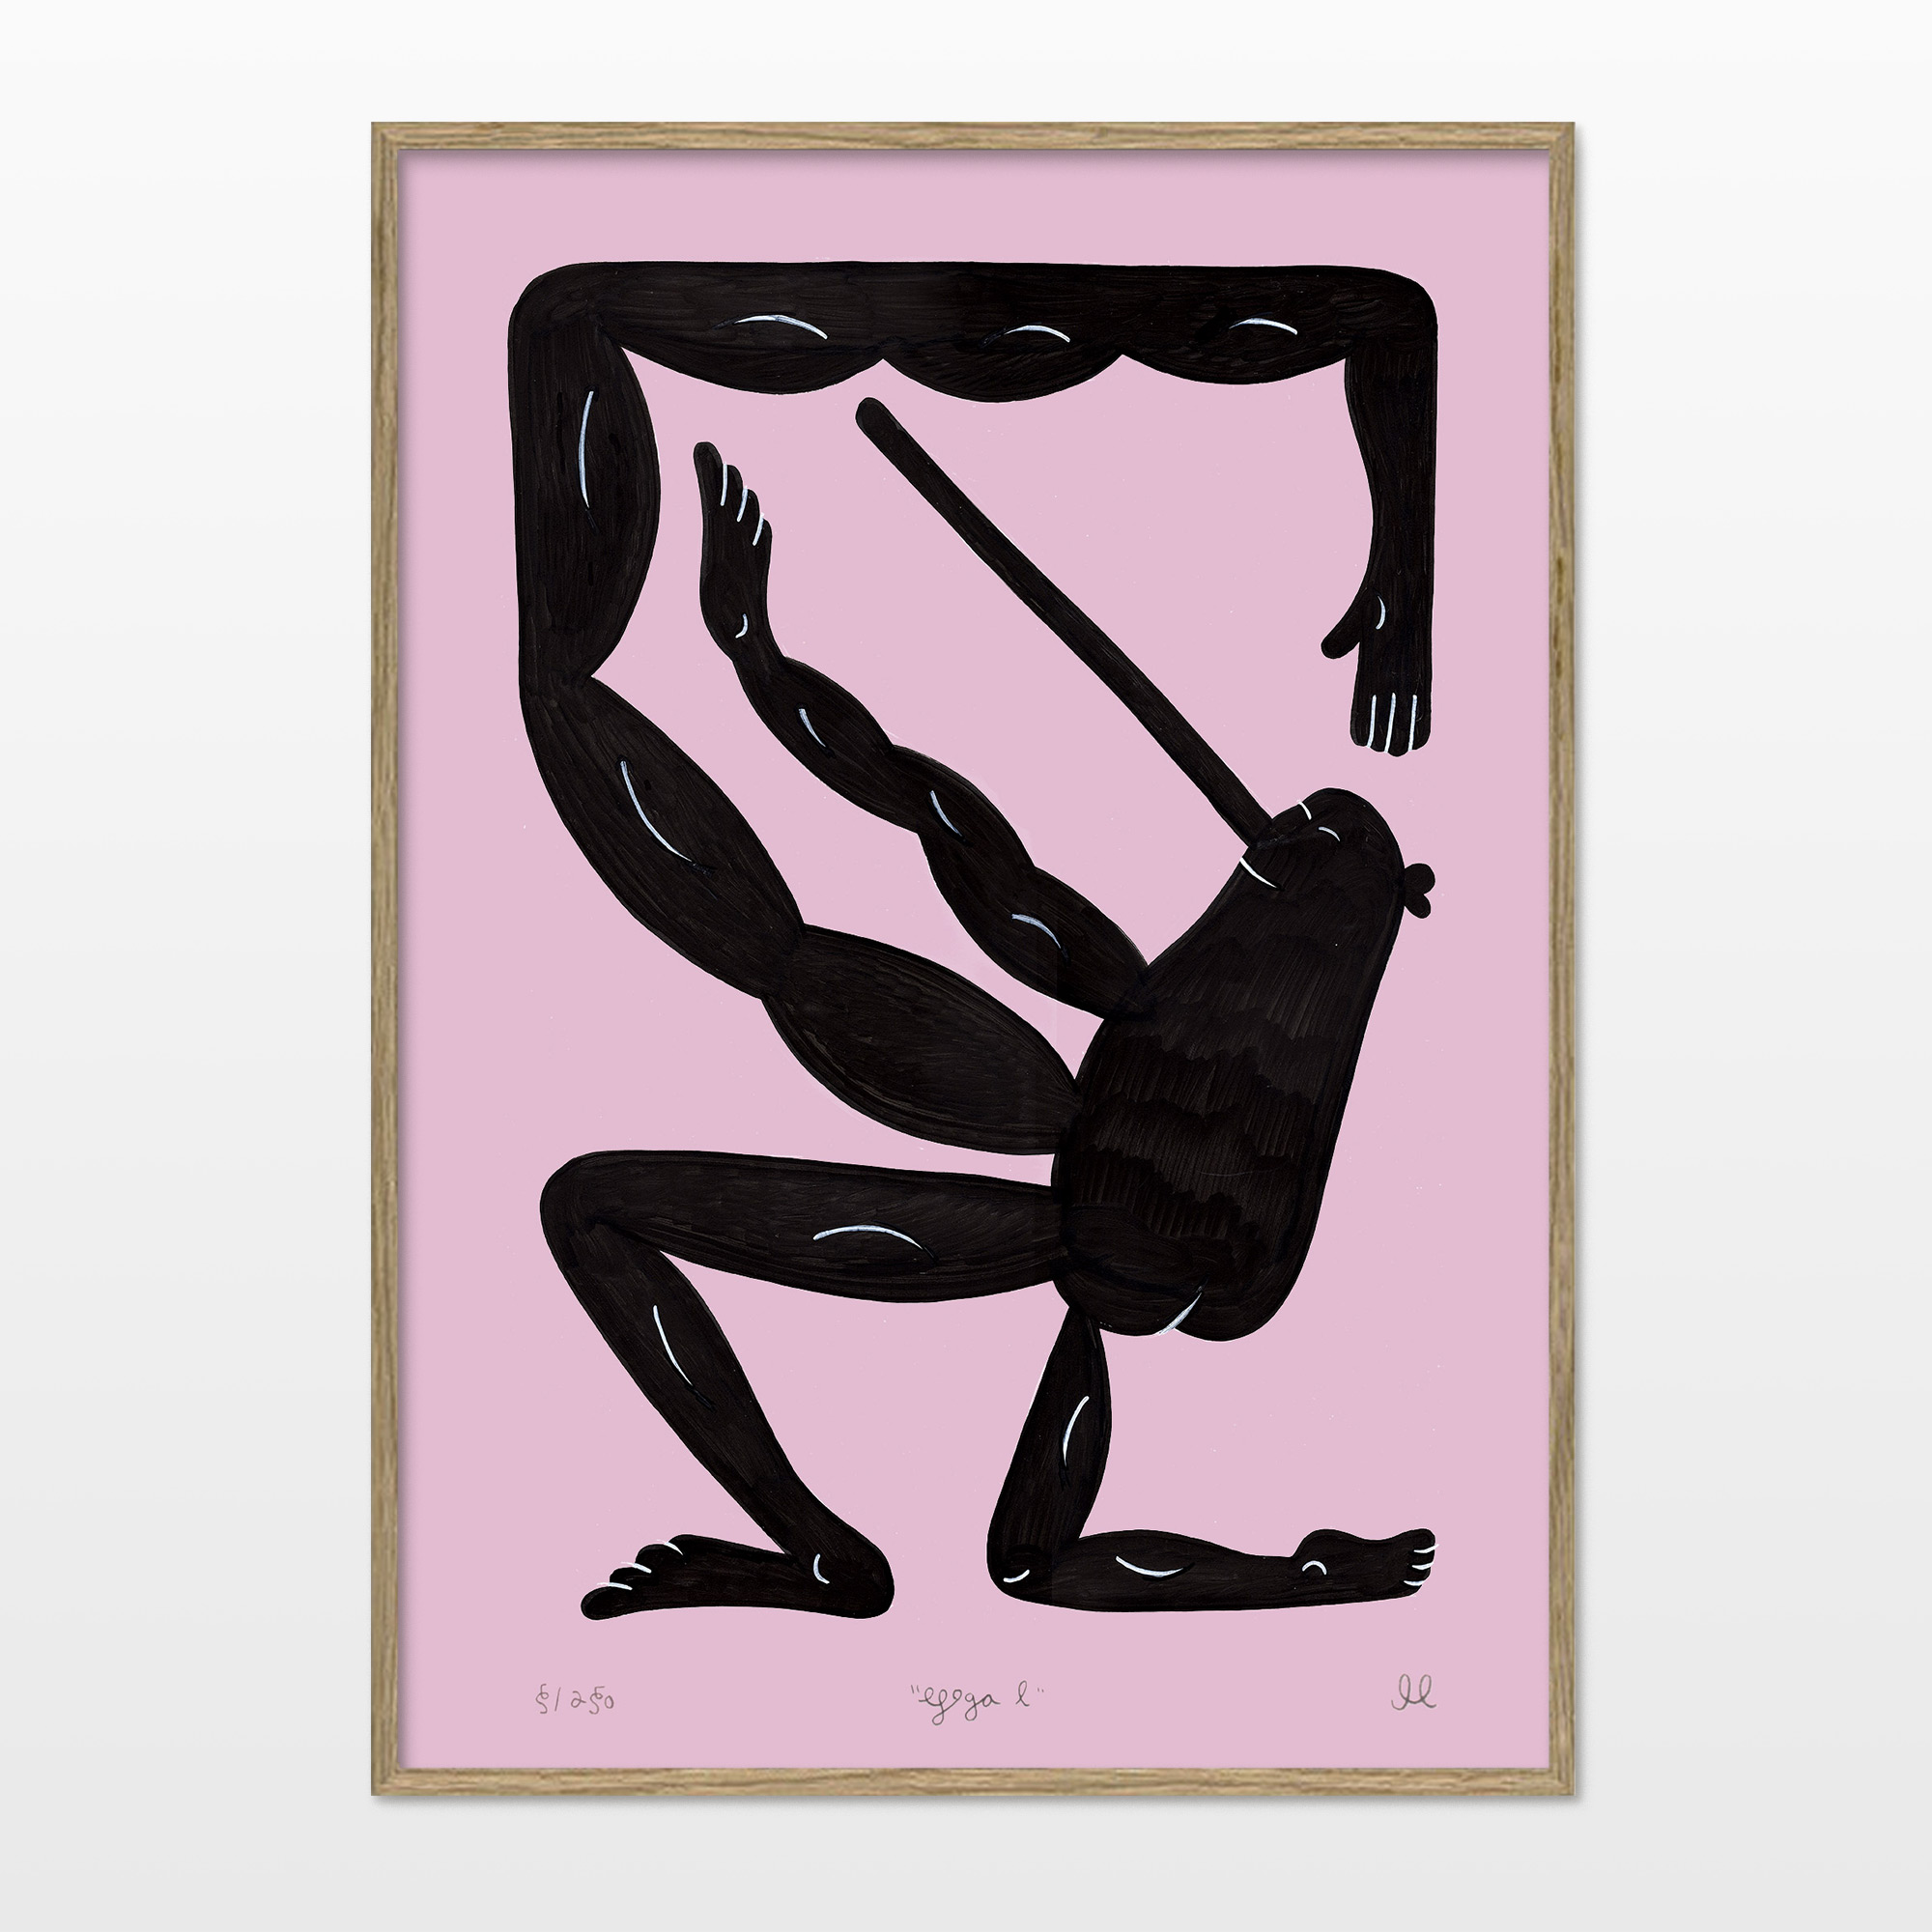 posters-prints, giclee-print, family-friendly, graphical, illustrative, minimalistic, pop, bodies, cartoons, humor, movement, people, pink, ink, paper, amusing, contemporary-art, copenhagen, danish, decorative, design, interior, interior-design, modern, modern-art, nordic, pop-art, posters, scandinavien, Buy original high quality art. Paintings, drawings, limited edition prints & posters by talented artists.